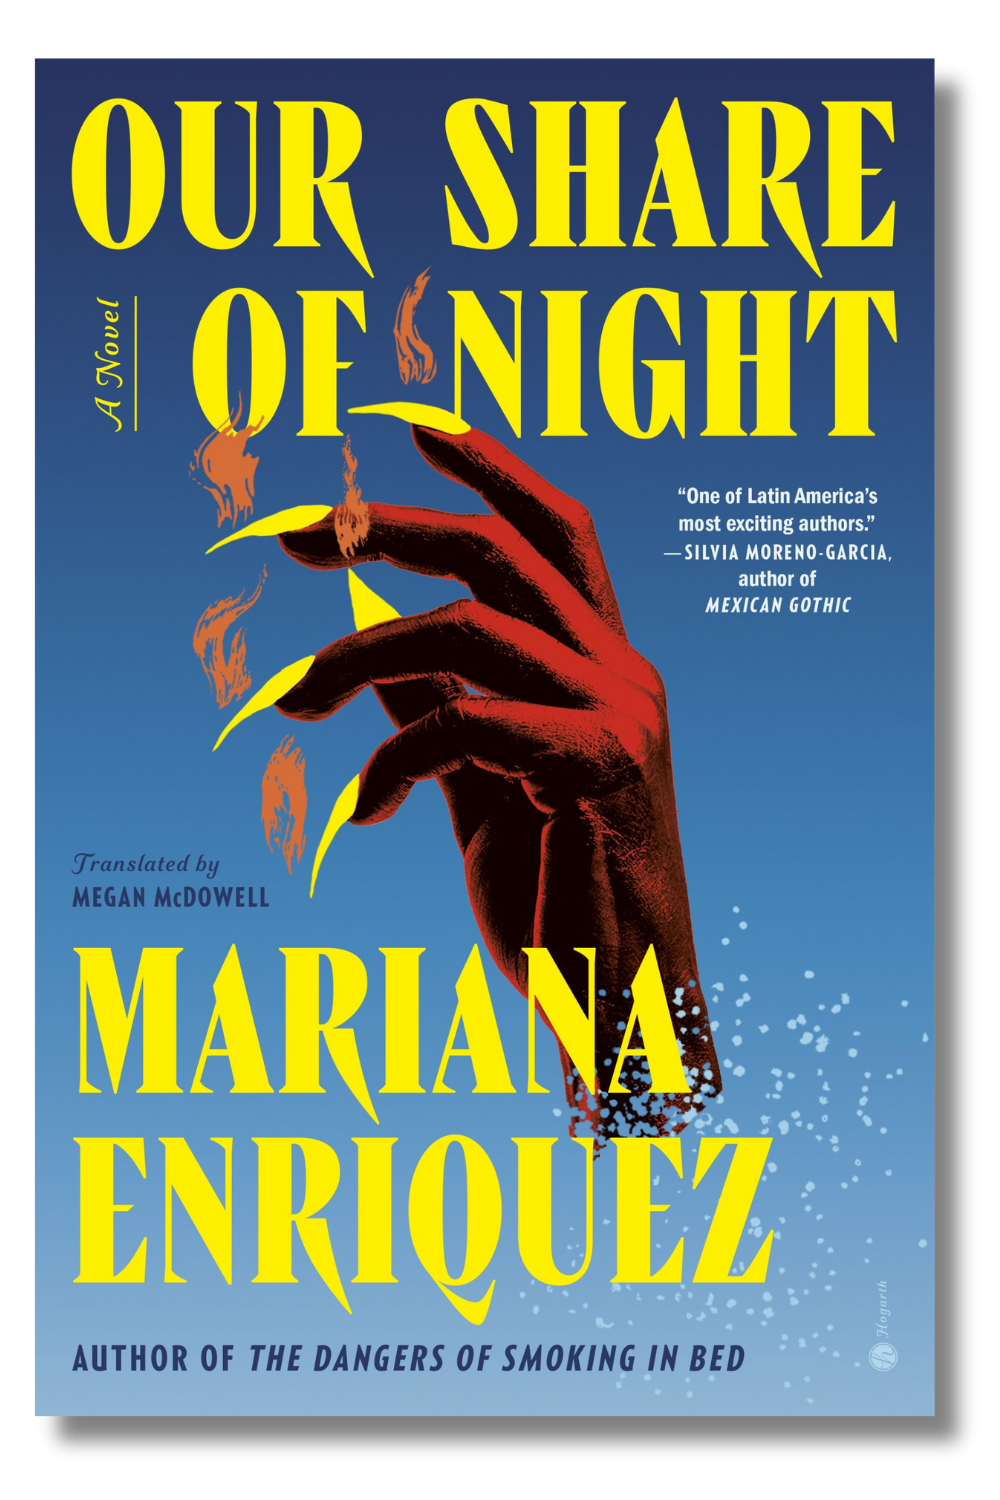 The cover of "Our Share of Night" by Mariana Enríquez, translated by Megan McDowell